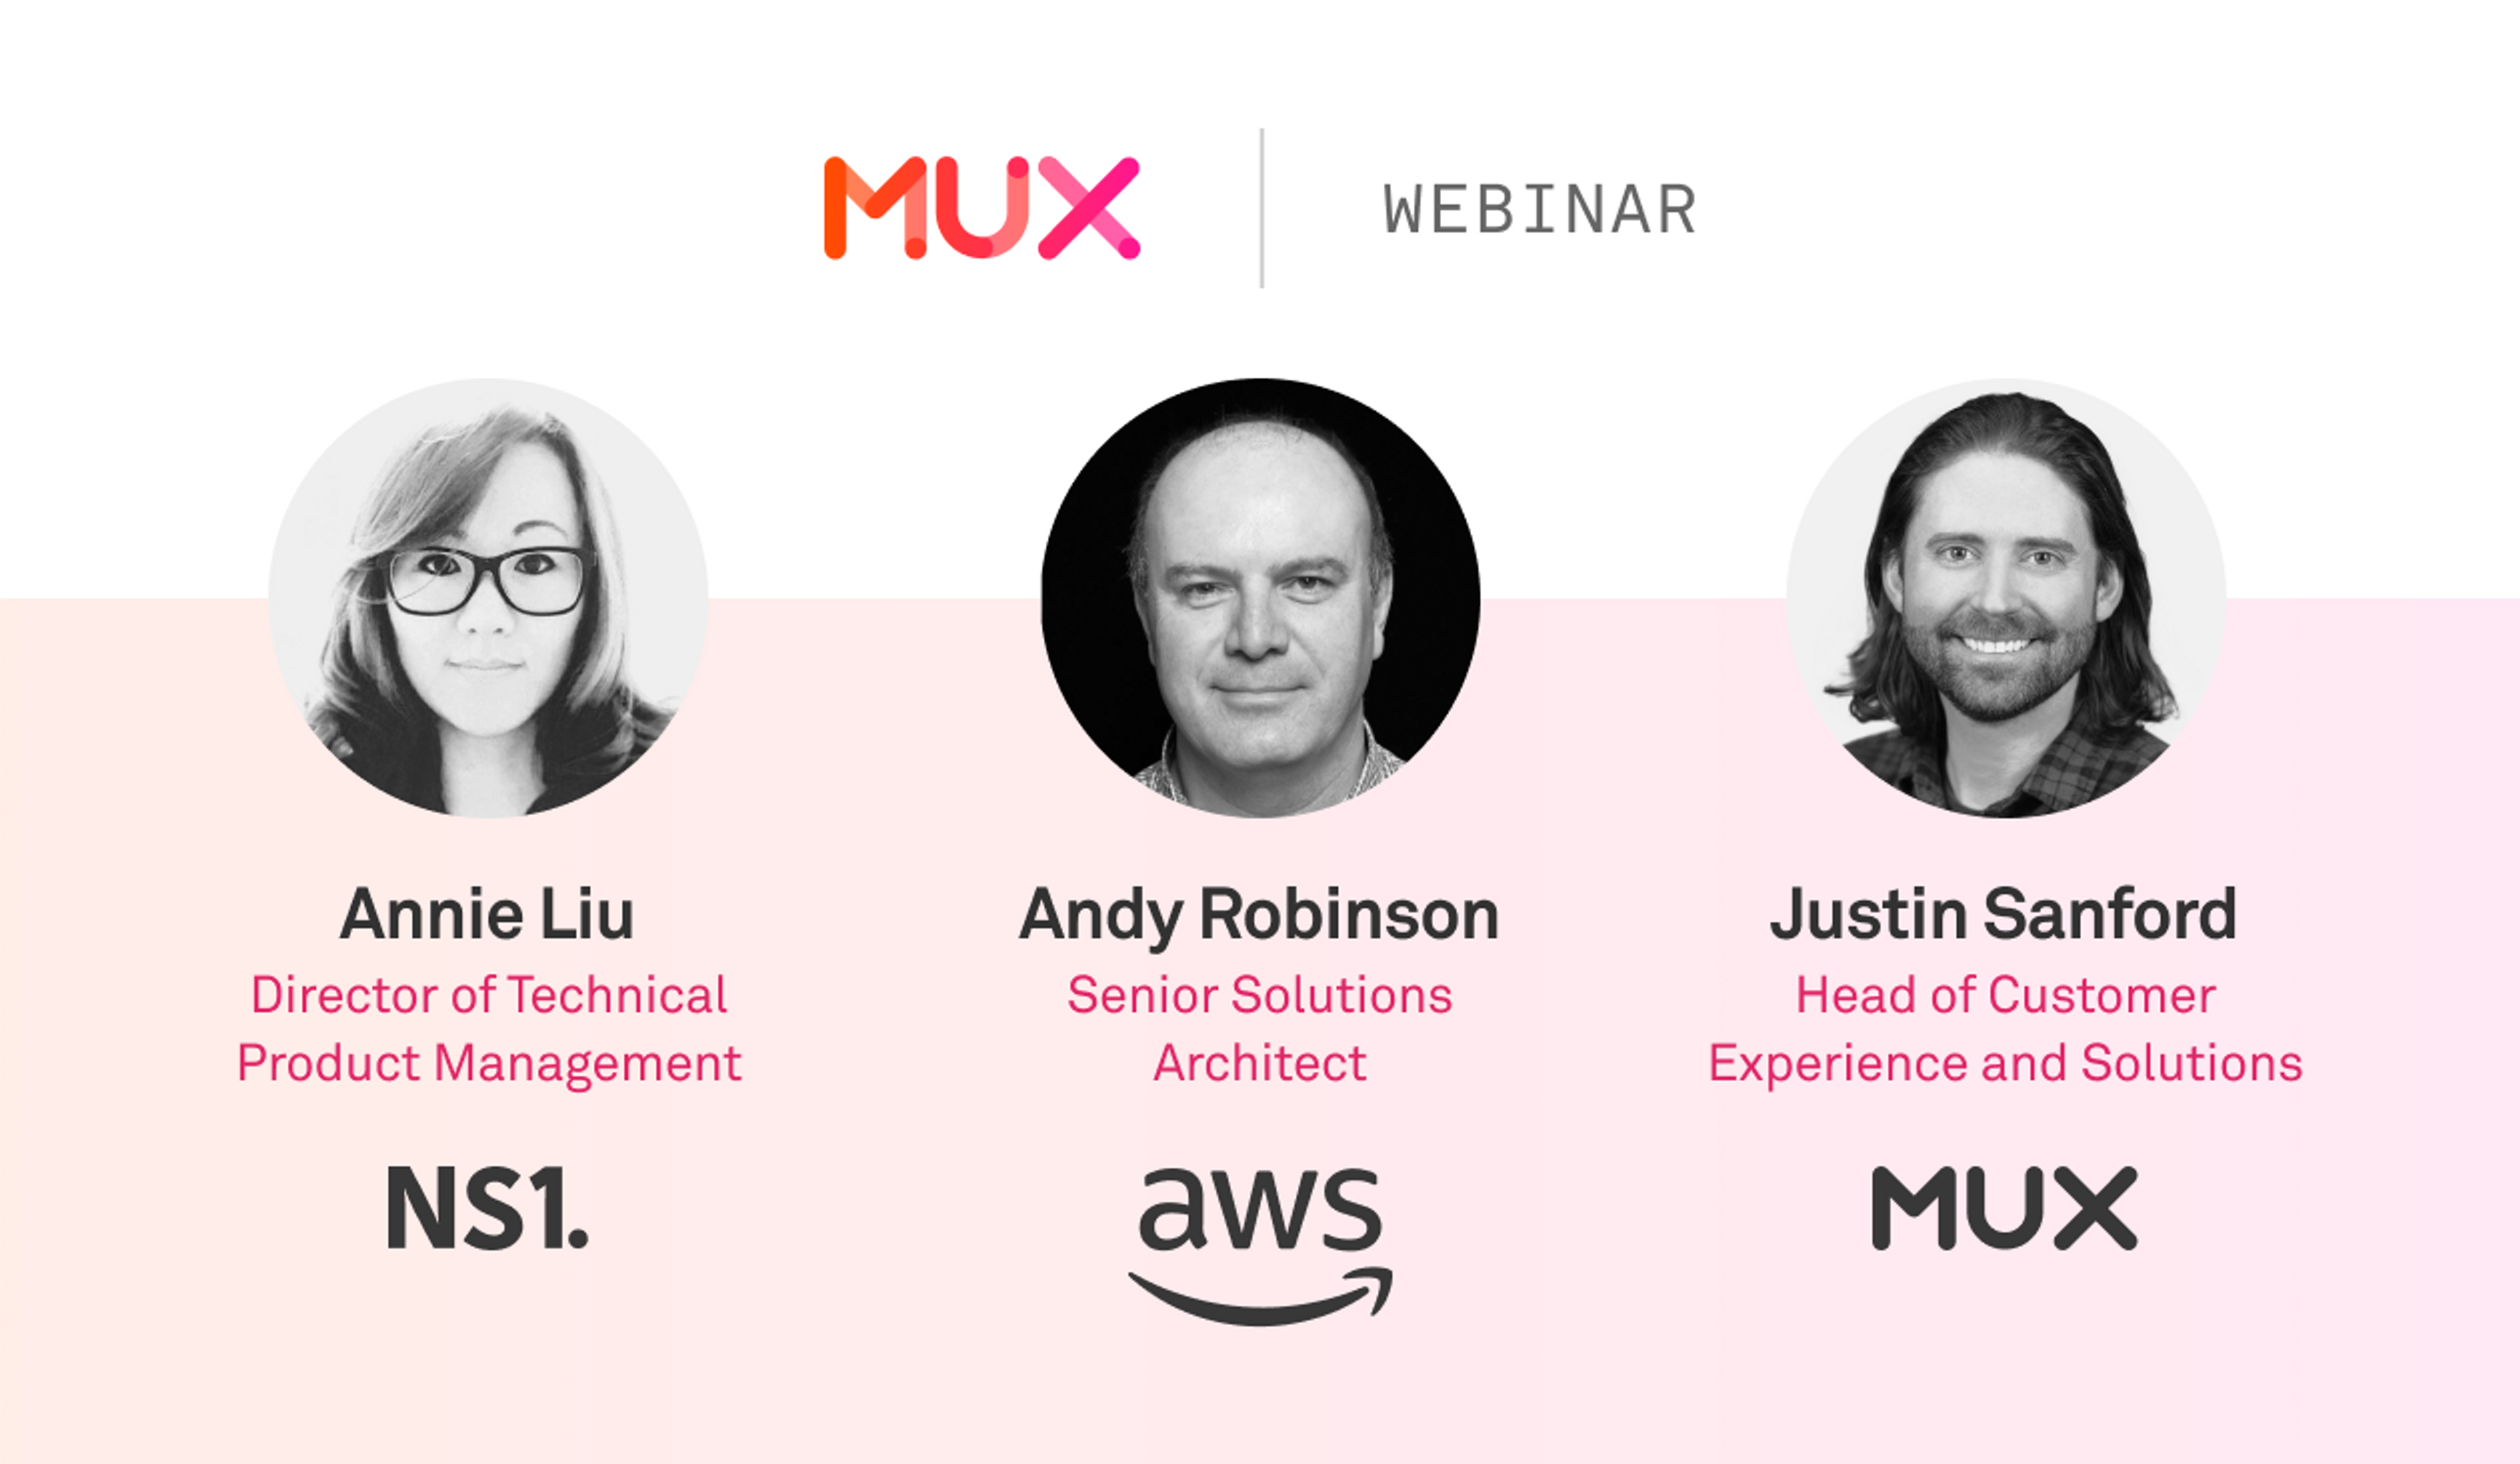 On a pink background, Mux logo and the word webinar. Below it are pictures of the 3 speakers and their names Annie Liu, Director of Technical Product Management at NS1, Andy Robinson, Senior Solutions Architect at AWS, Justin Sanford, Head of Customer Experience and Success at Mux